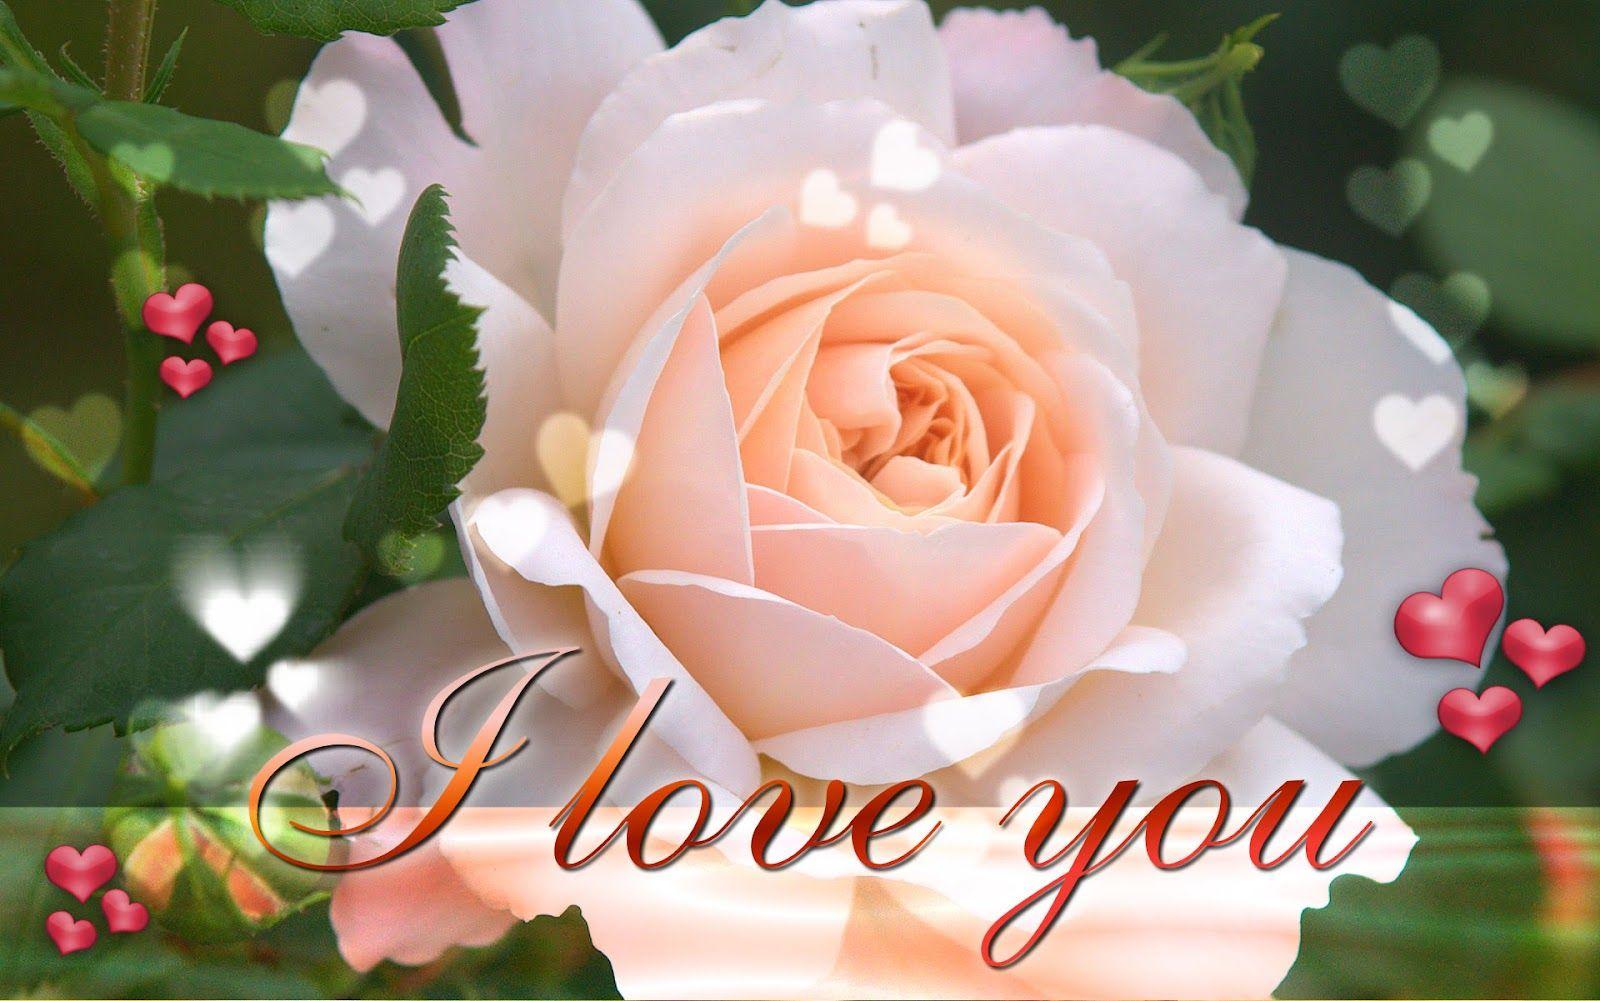 Funny Picture Gallery: Love roses wallpaper, love rose flower